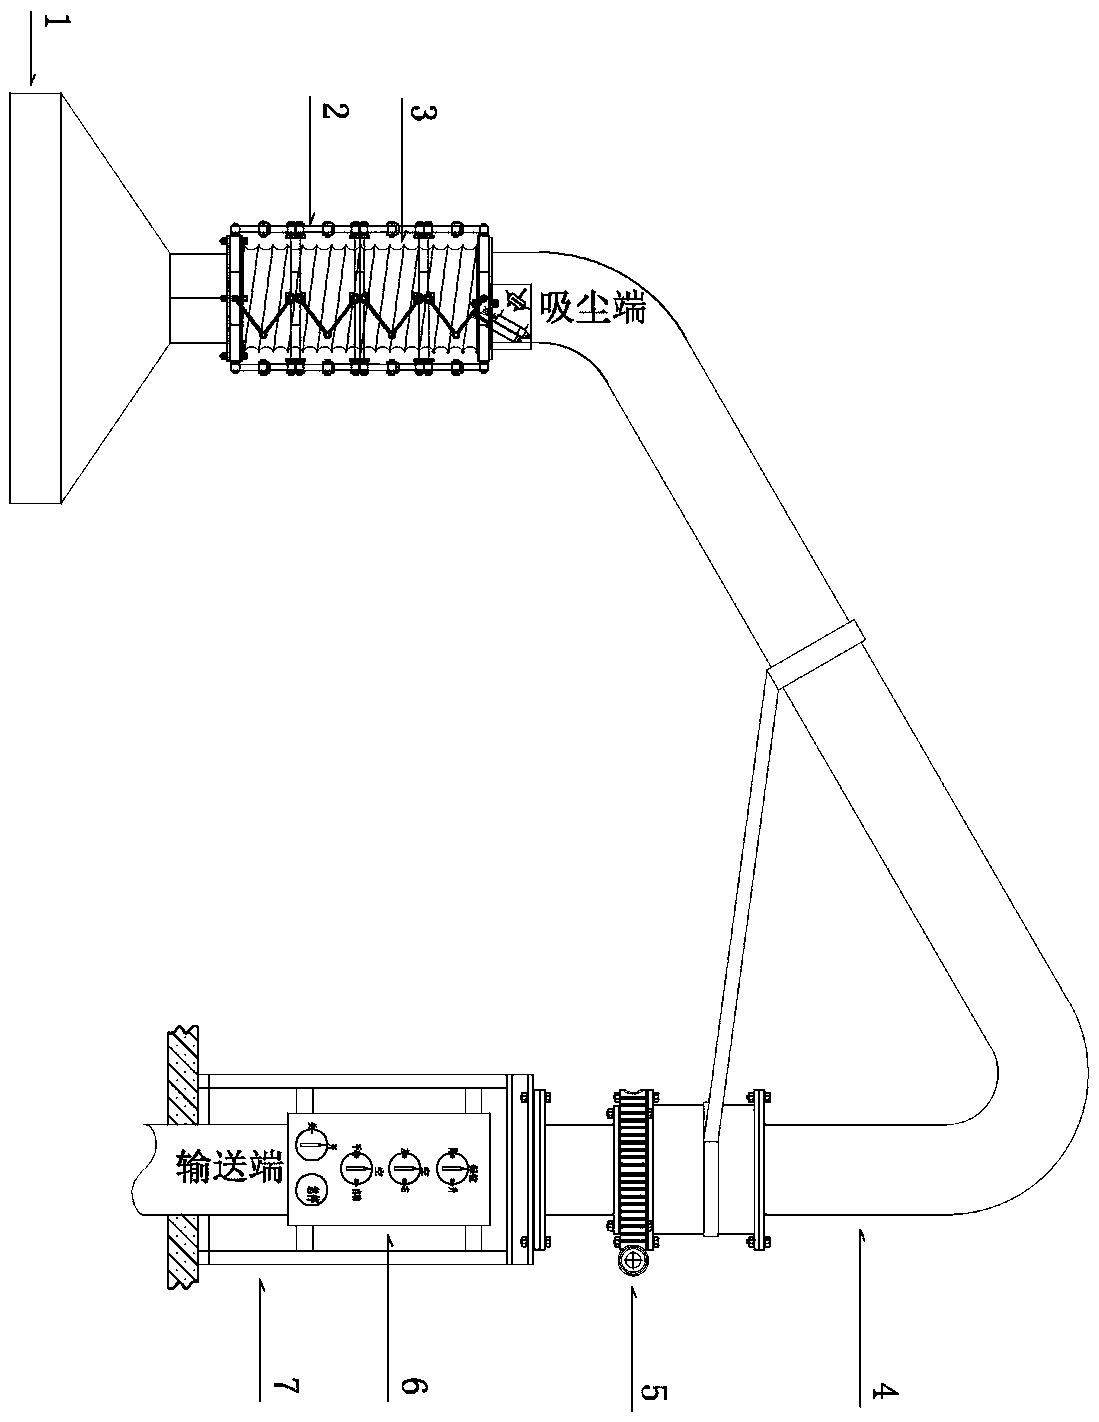 Whole-process automatic tracking dust-removal system for smelting furnace and realization method thereof